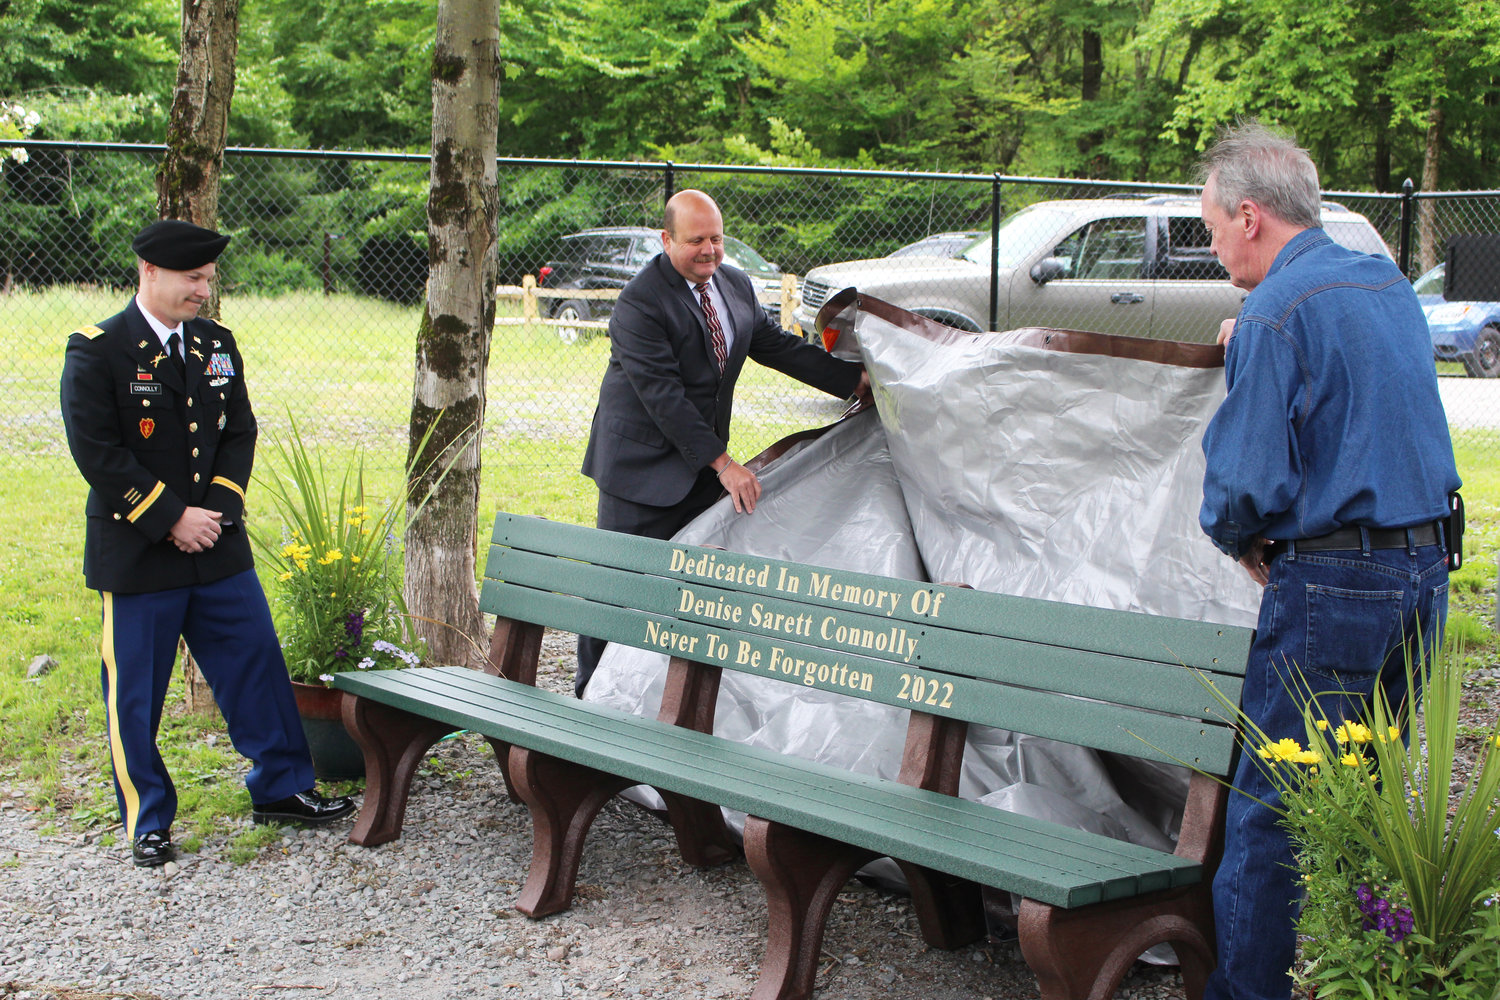 Town Supervisor Daniel Sturm (center) and Michael Connolly unveil the bench while Chris Connolly looks on. Last Saturday was also Denise Connolly’s birthday.